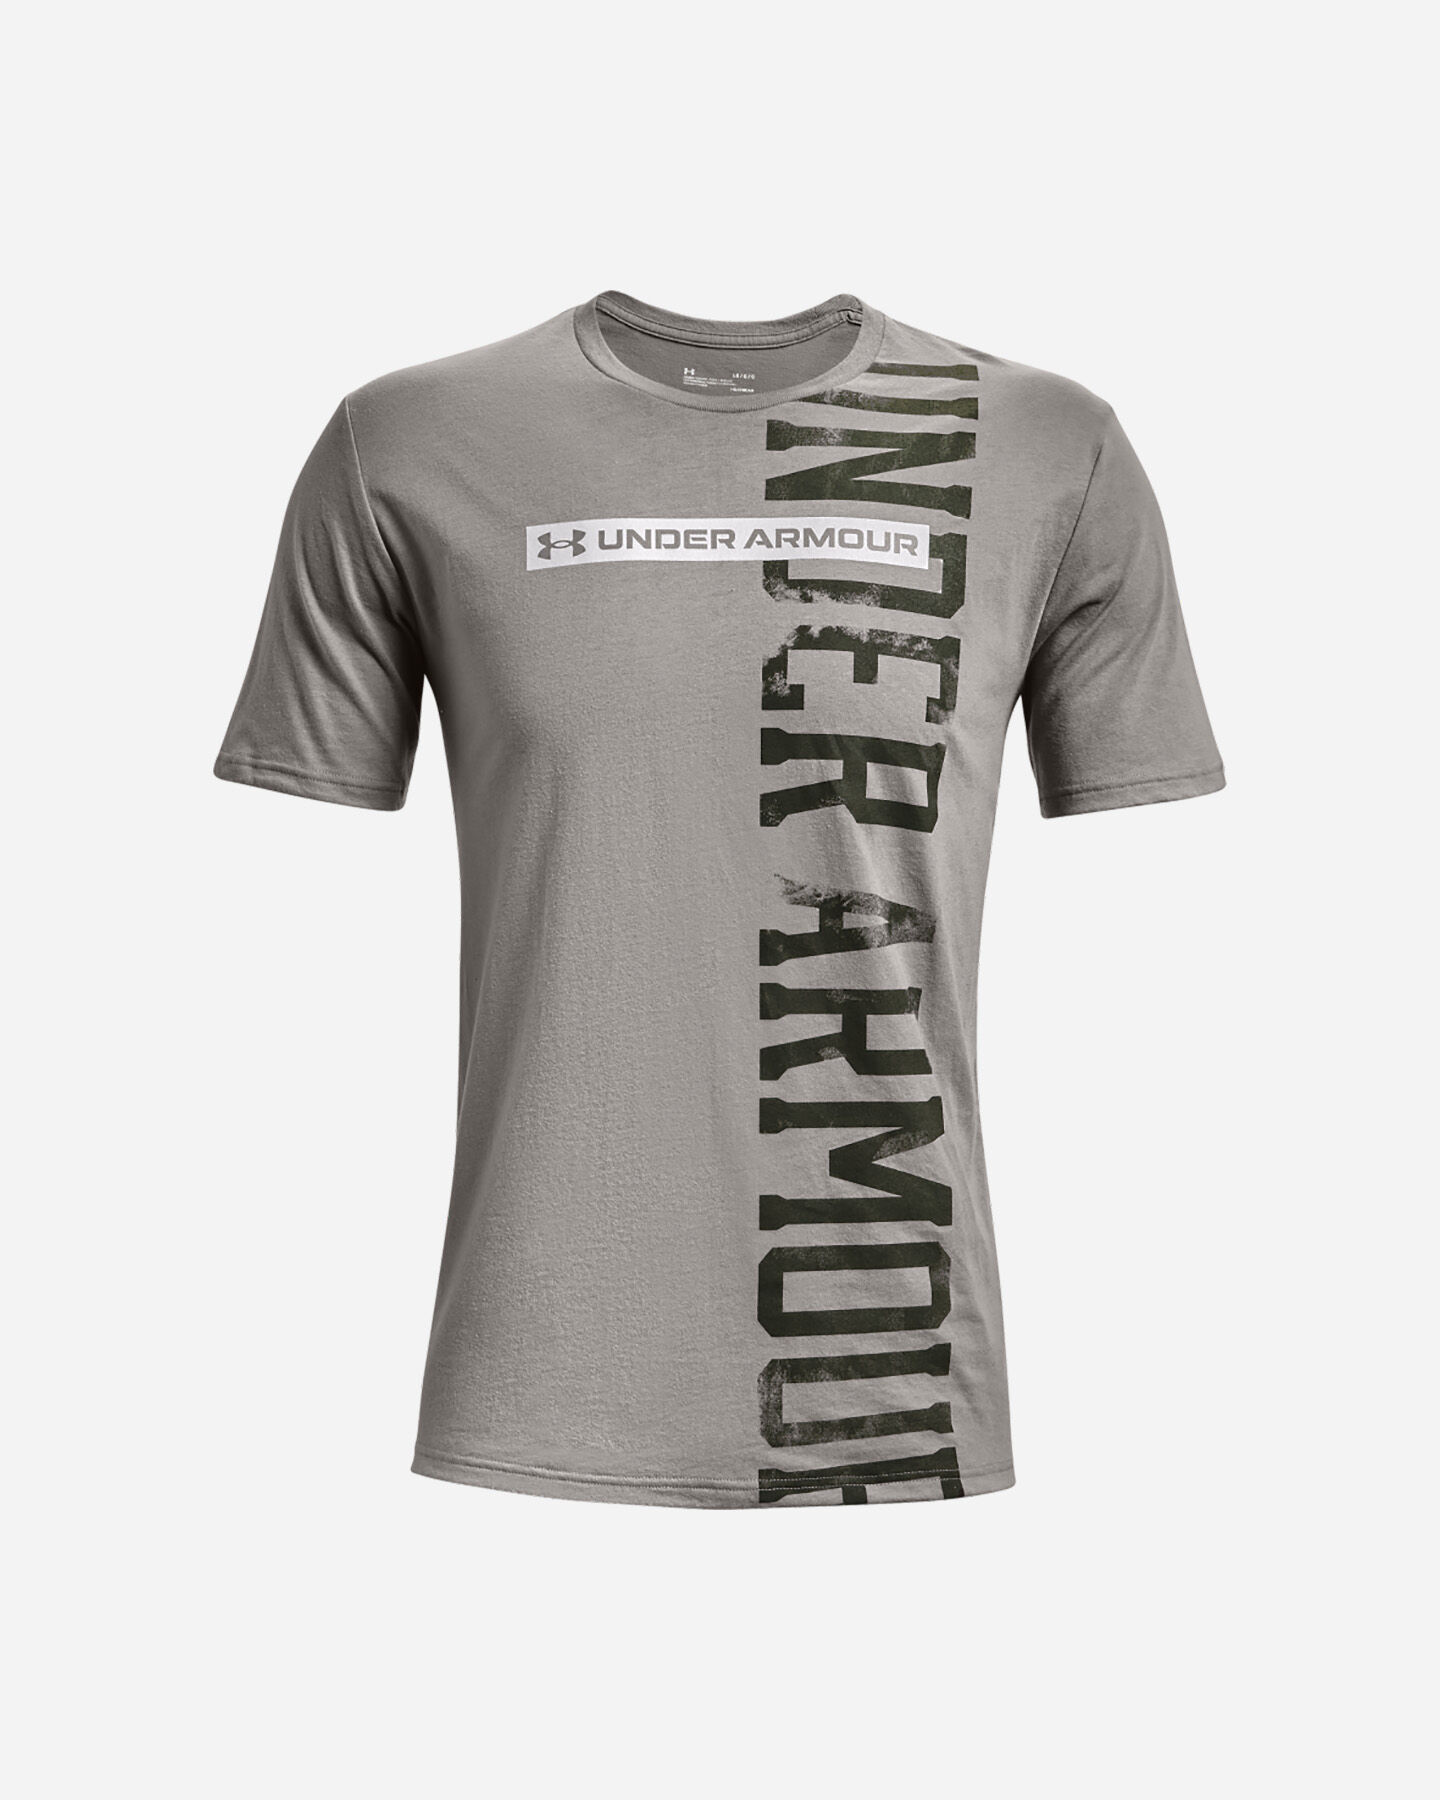  T-Shirt UNDER ARMOUR VERTICAL SIGNATURE M S5336691|0066|XS scatto 0